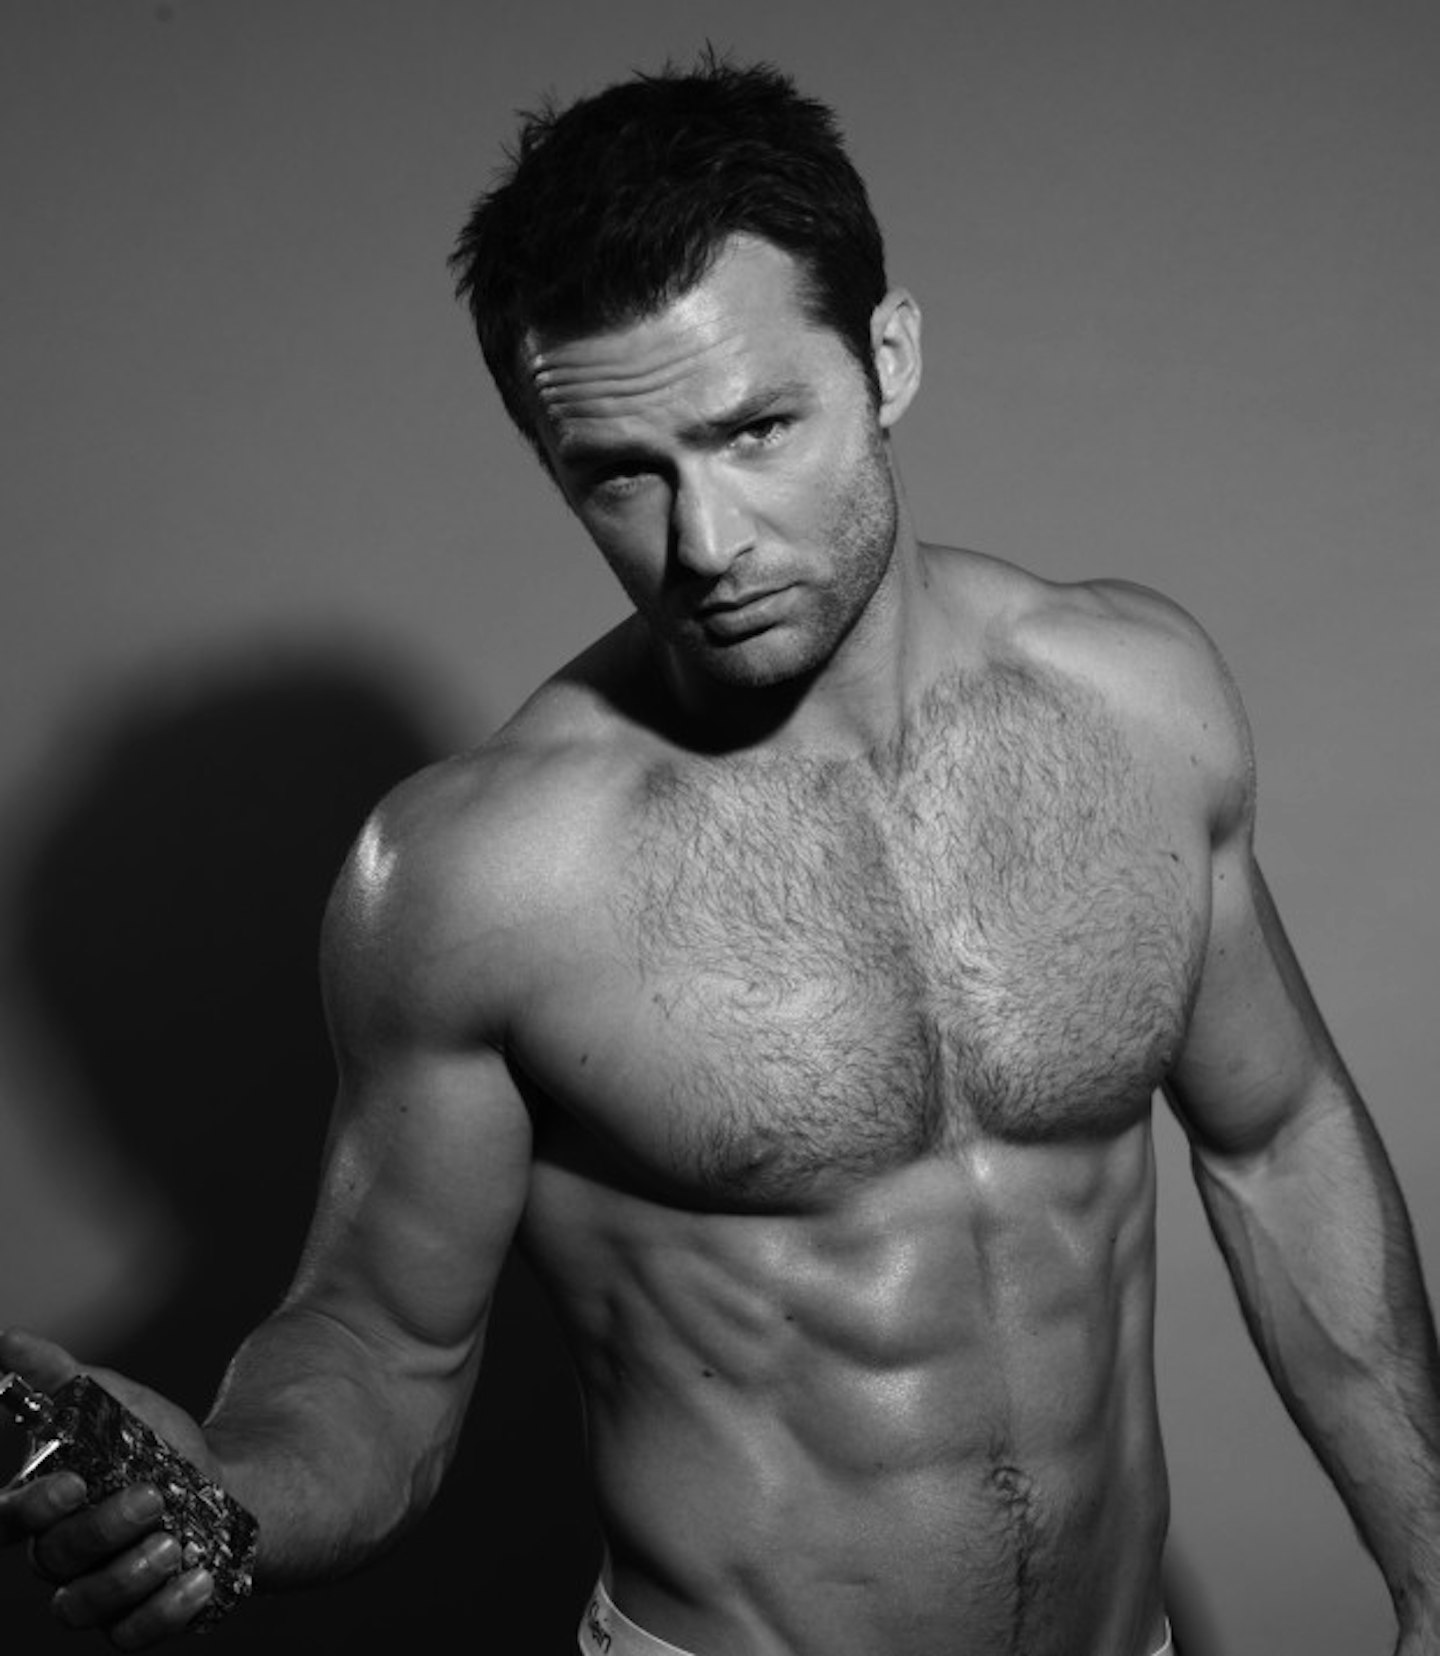 EMBARGOED UNTIL 07.10.15 00.01 Harry Judd teams up with NOW to launch Obleshion, Eau De Walker fragrance ahead of Season 6 of The Walking Dead (2)